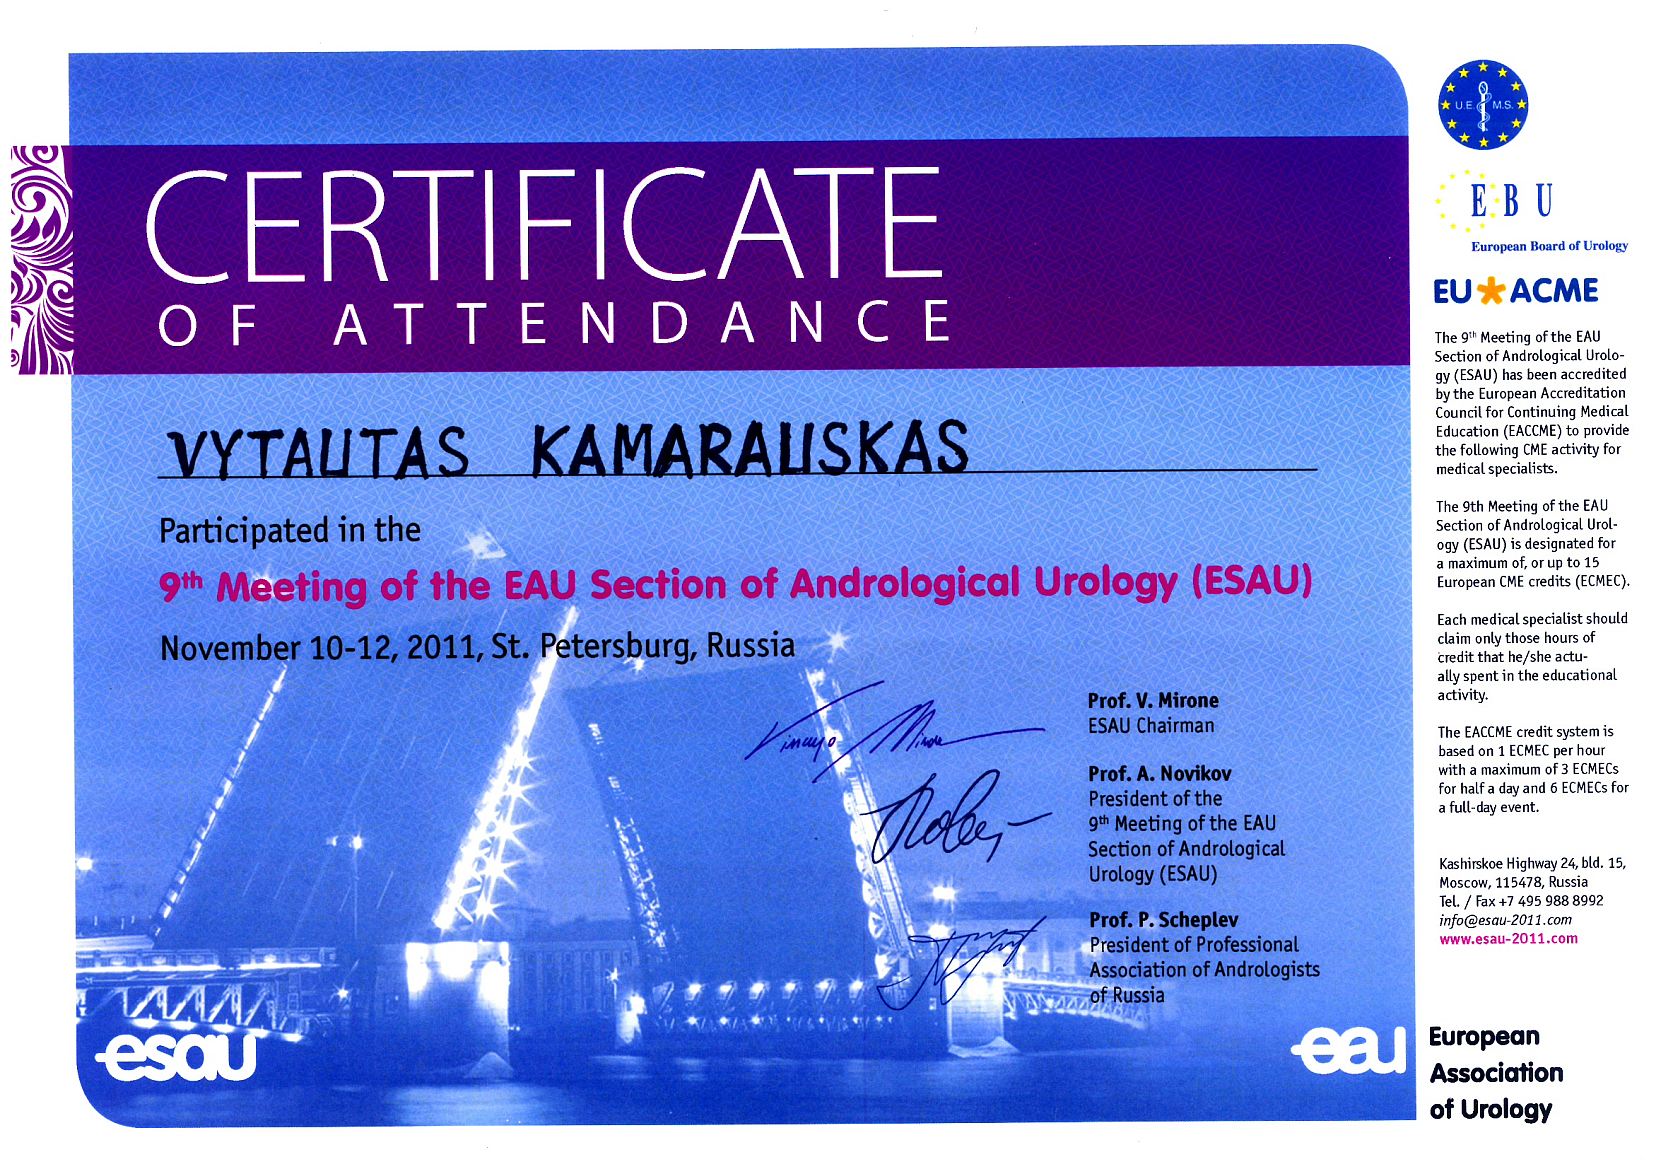 9th Meeting of the European Association of Urology Section of Andrological Urology in St. Petersburg, Russia, 10-12 November 2011